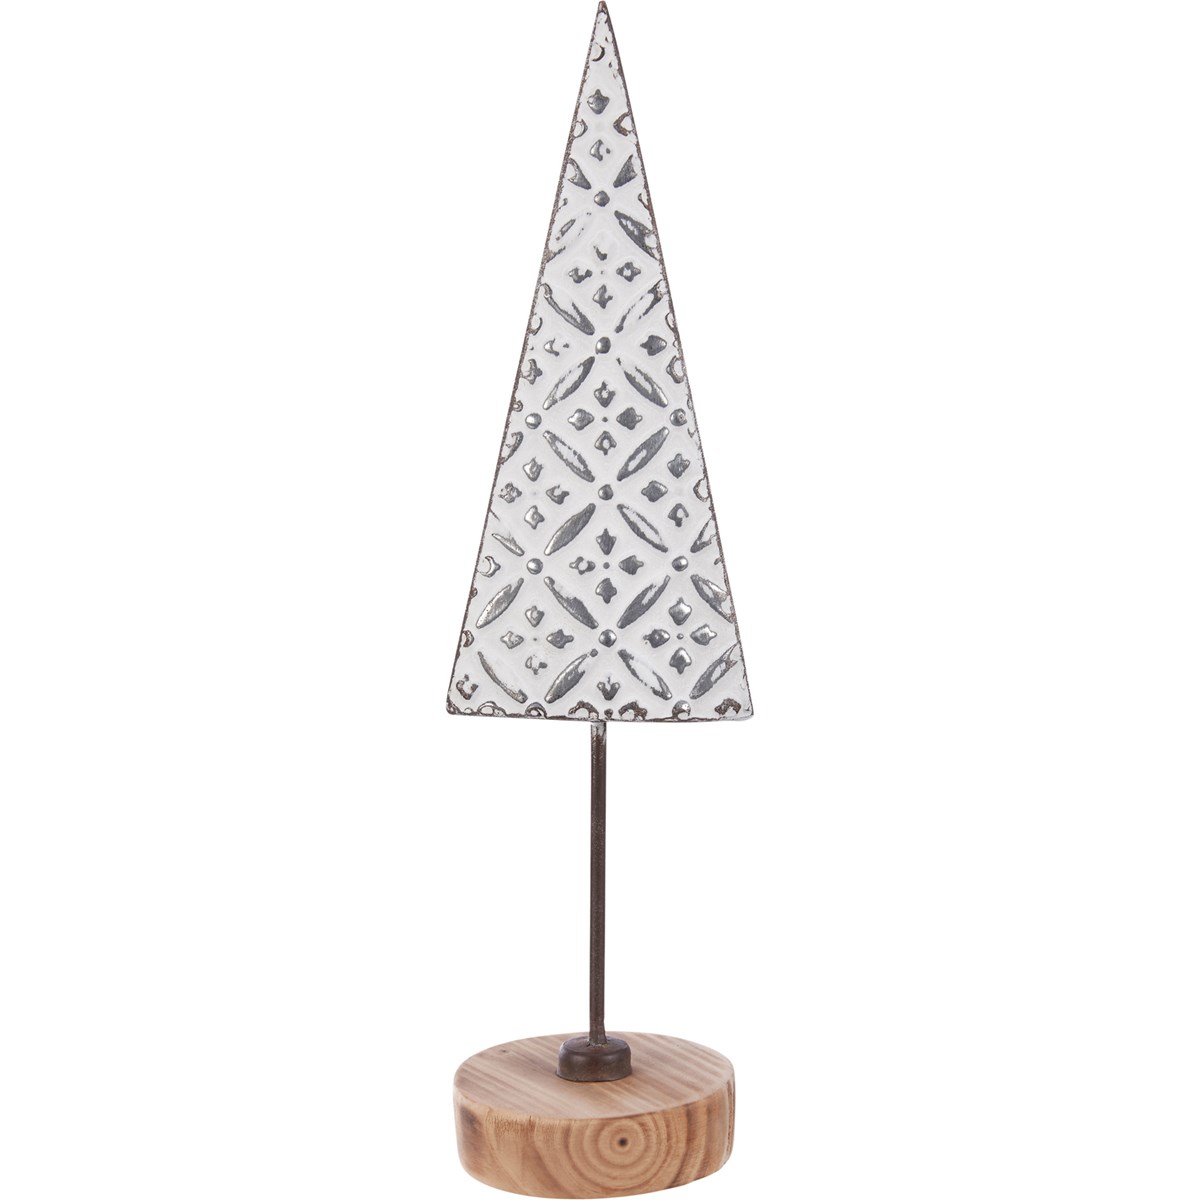 Square Tile Tree Small Sitter - Metal, Wood